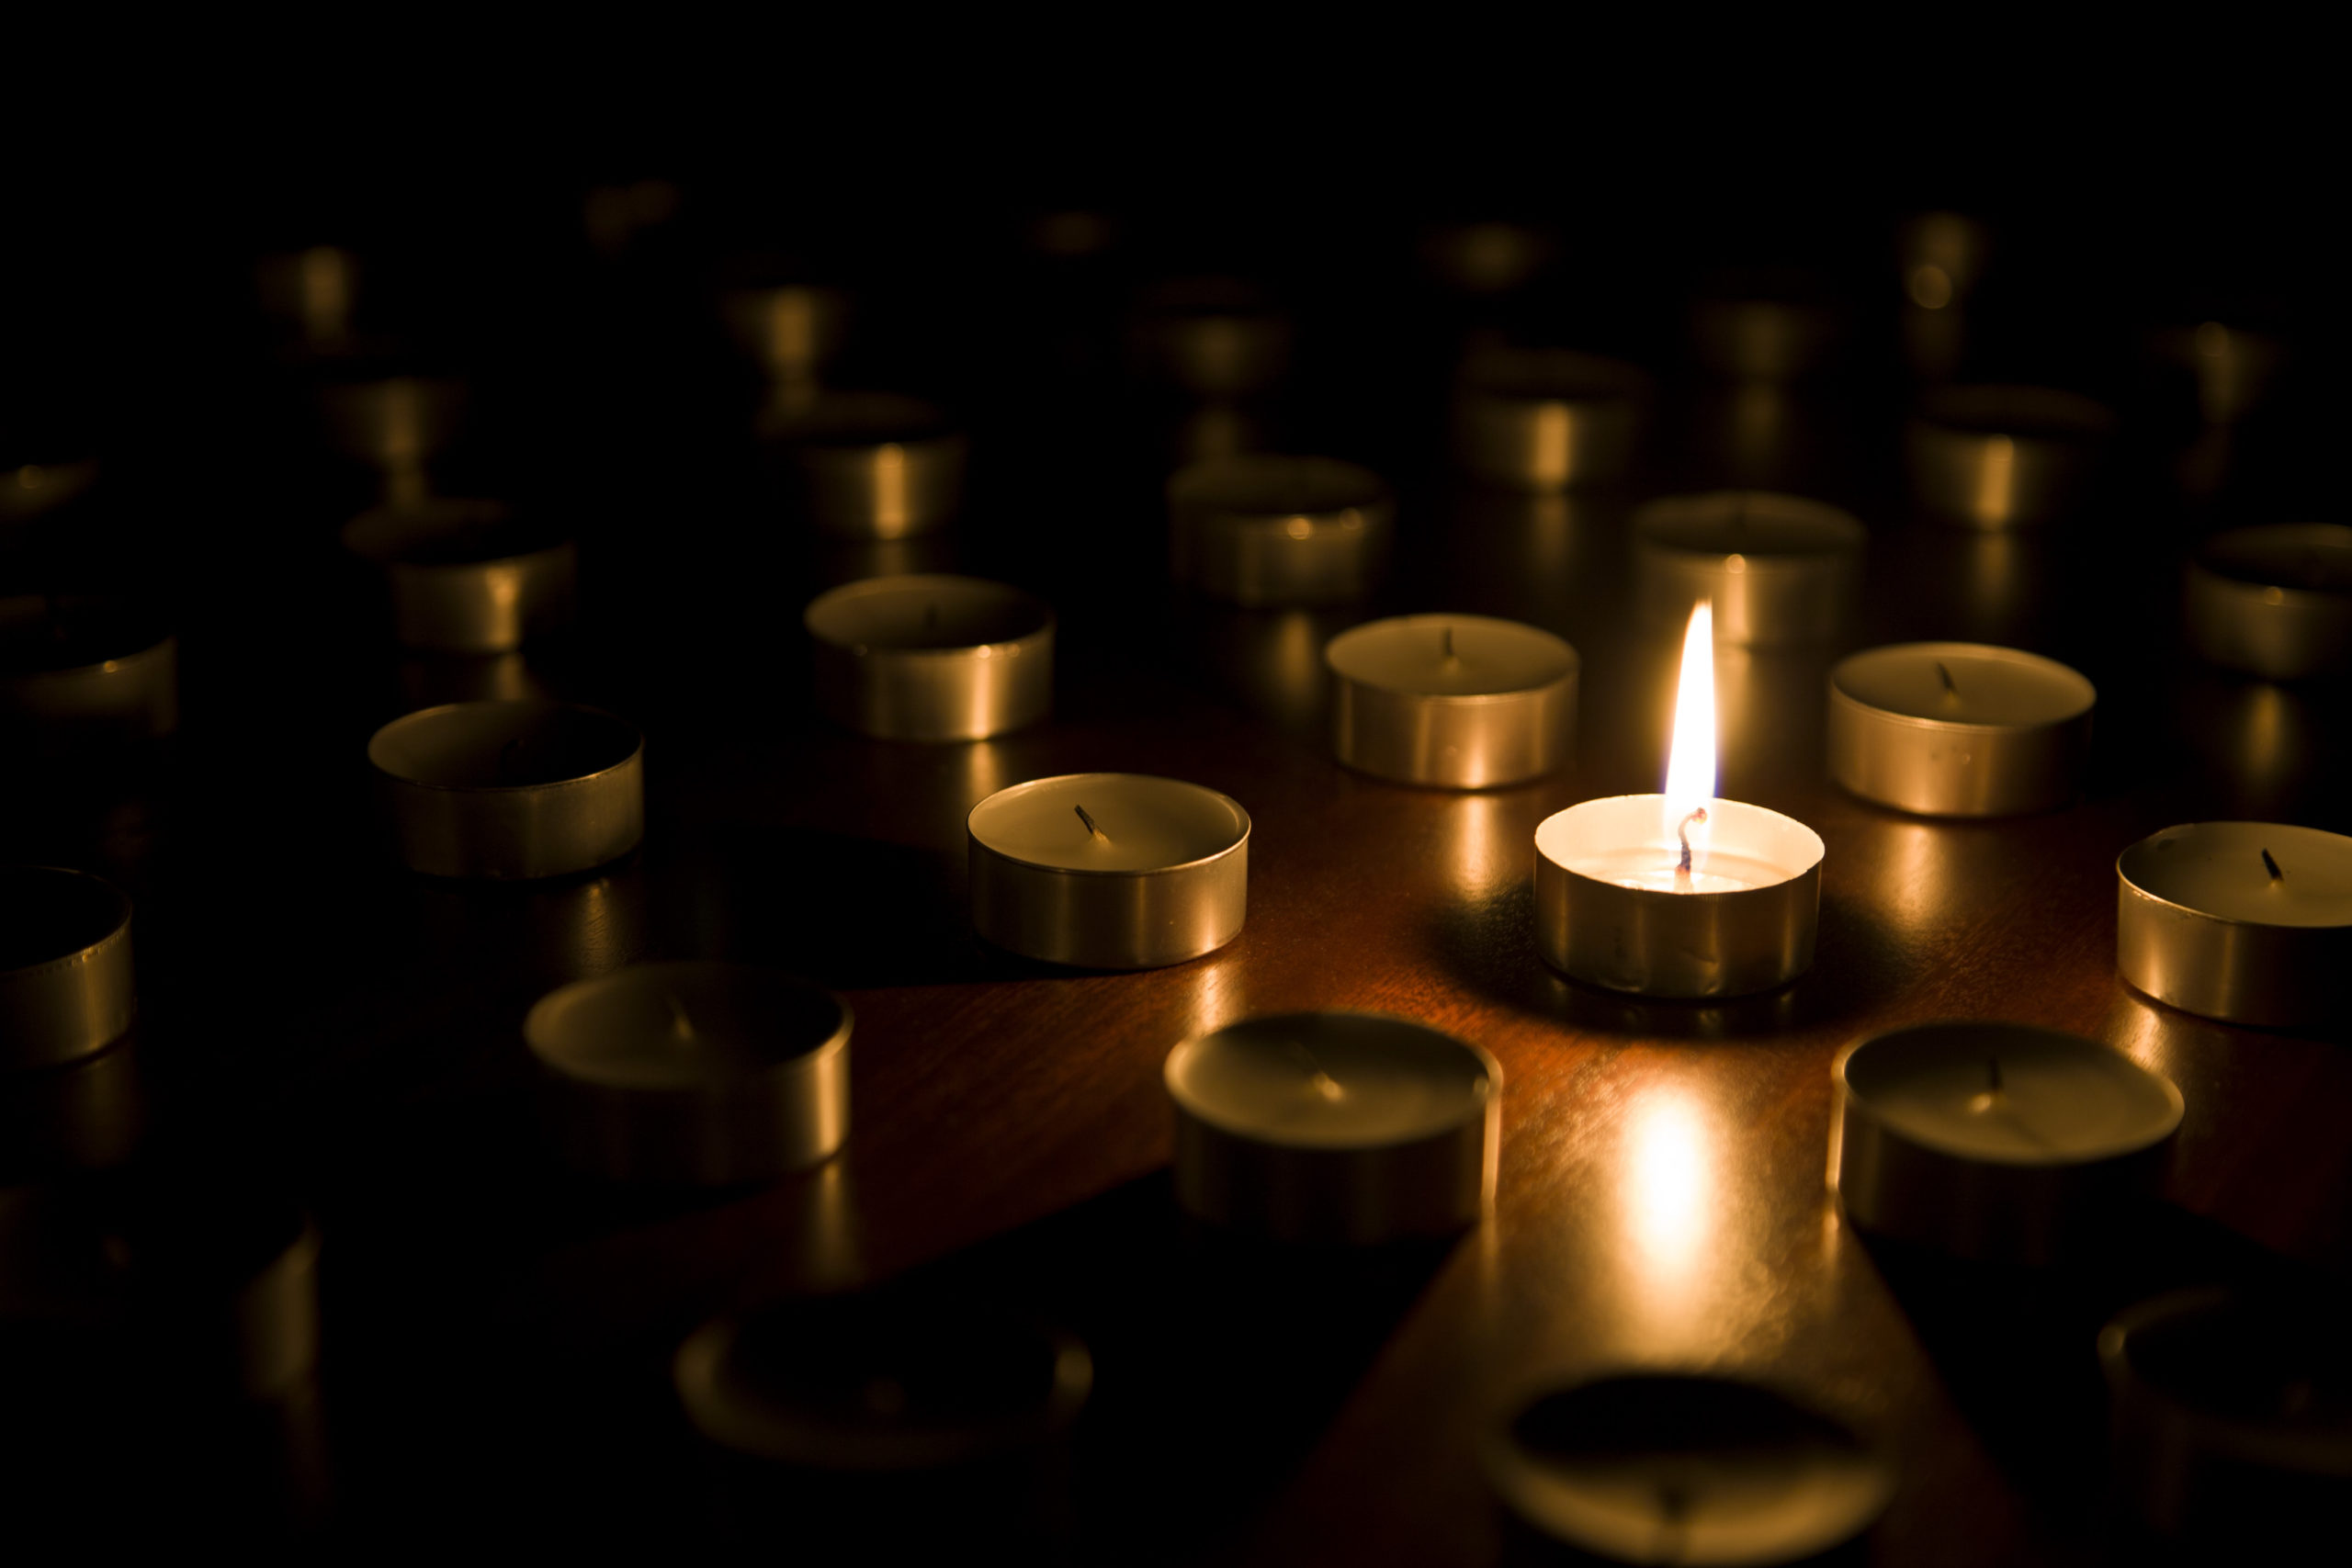 Single lit tealight candle surrounded by unlit tealight candles